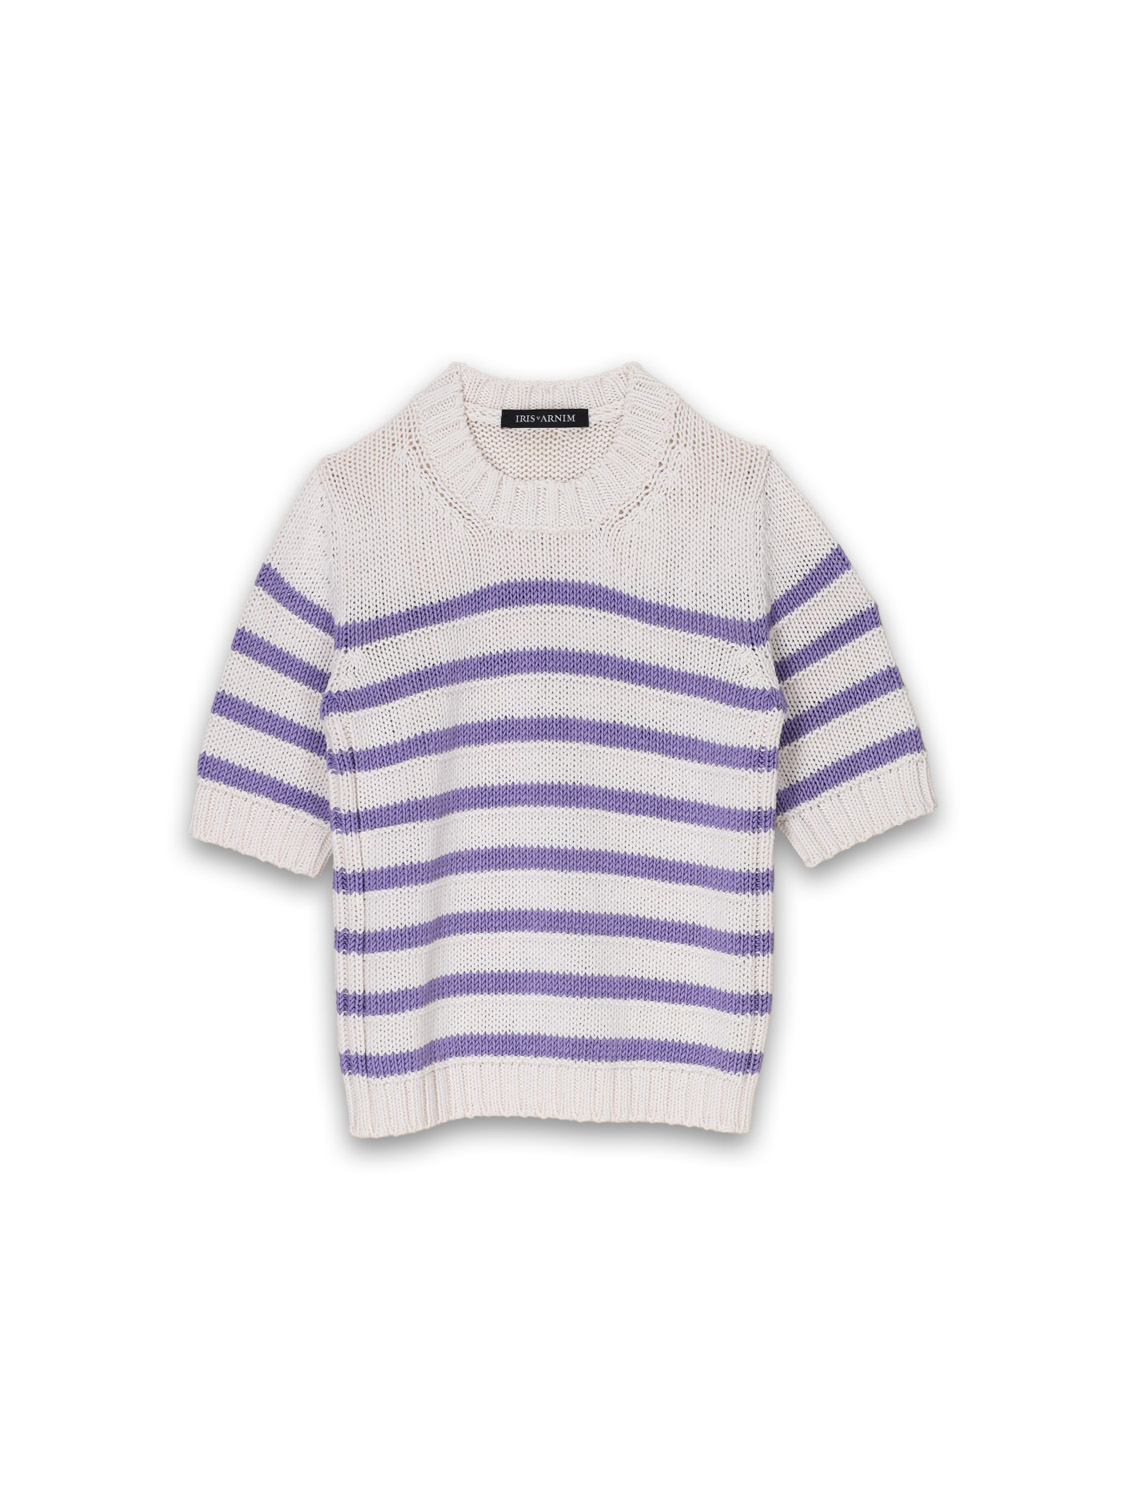 Pallas - Short-sleeved sweater with a striped design 